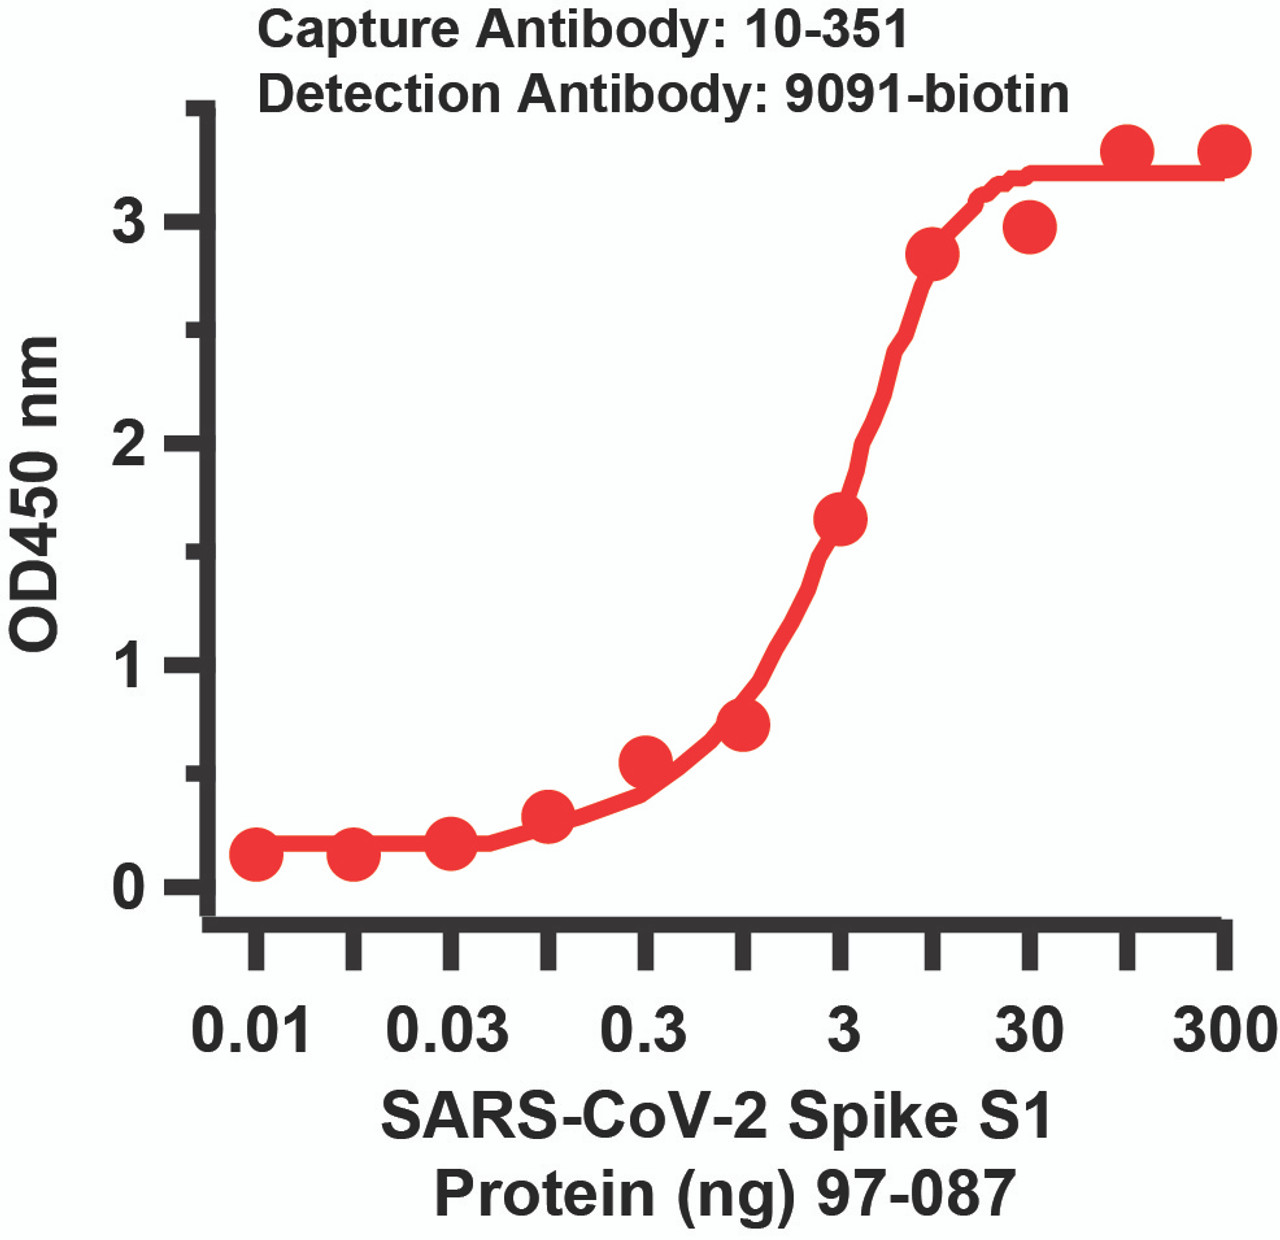 Figure 2 Sandwich ELISA for SARS-CoV-2 (COVID-19) Matched Pair Spike S1 Antibodies
Antibodies: SARS-CoV-2 (COVID-19) Spike Antibodies, 10-351 and 9091-biotin. A sandwich ELISA was performed using SARS-CoV-2 Spike S1 antibody (10-351, 2ug/ml) as capture antibody, the Spike S1 recombinant protein as the binding protein (97-087) , and the anti-SARS-CoV-2 Spike S1 antibody (9091-biotin, 1ug/ml) as the detection antibody. Secondary: Streptavidin-HRP at 1:10000 dilution. Detection range is from 0.03 ng to 300 ng. EC50 = 3.14 ng